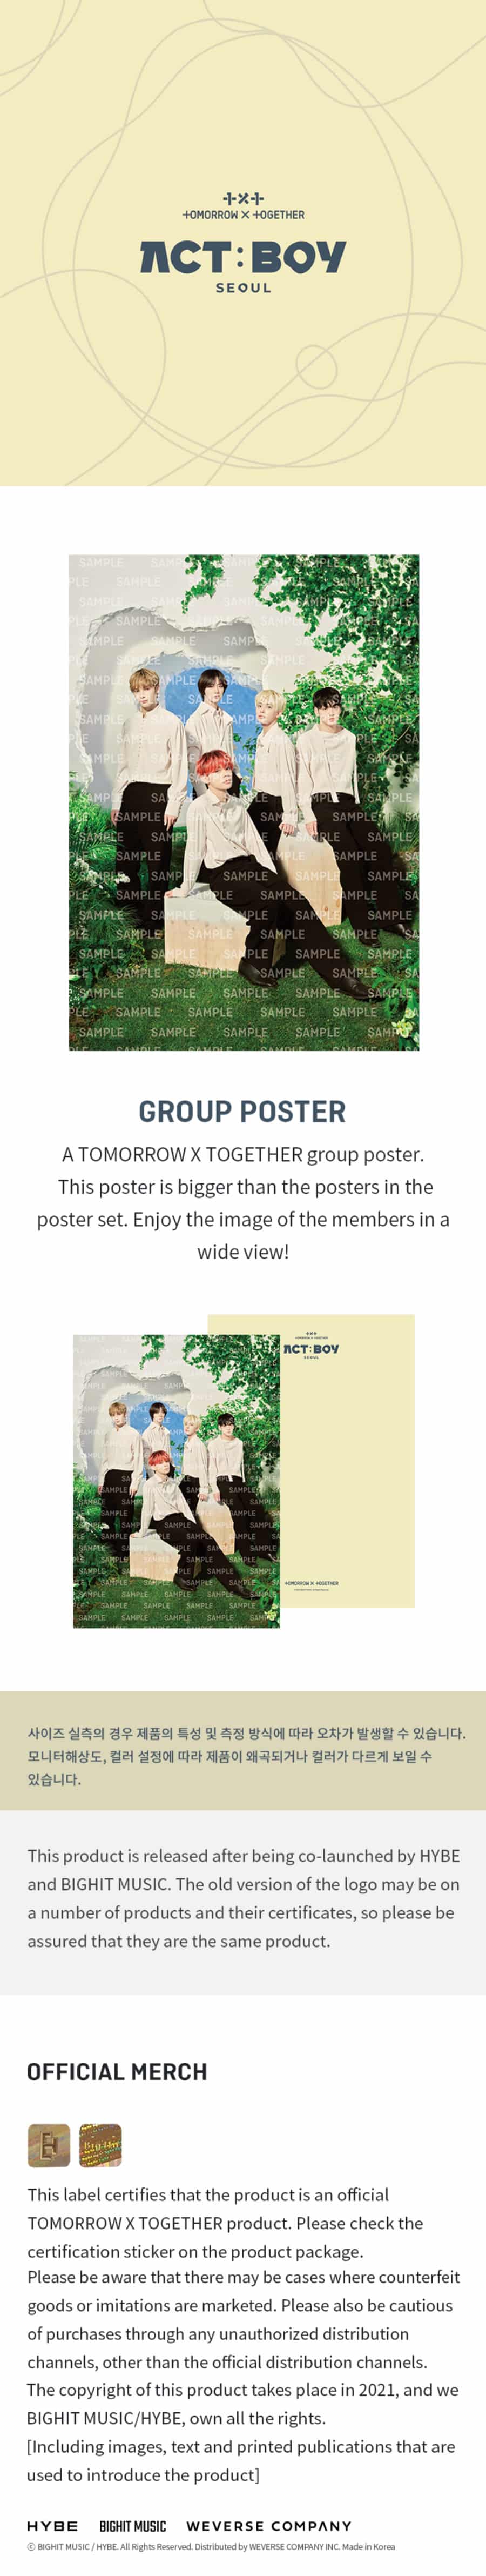 tomorrow-x-together-txt-troup-poster-wholesale